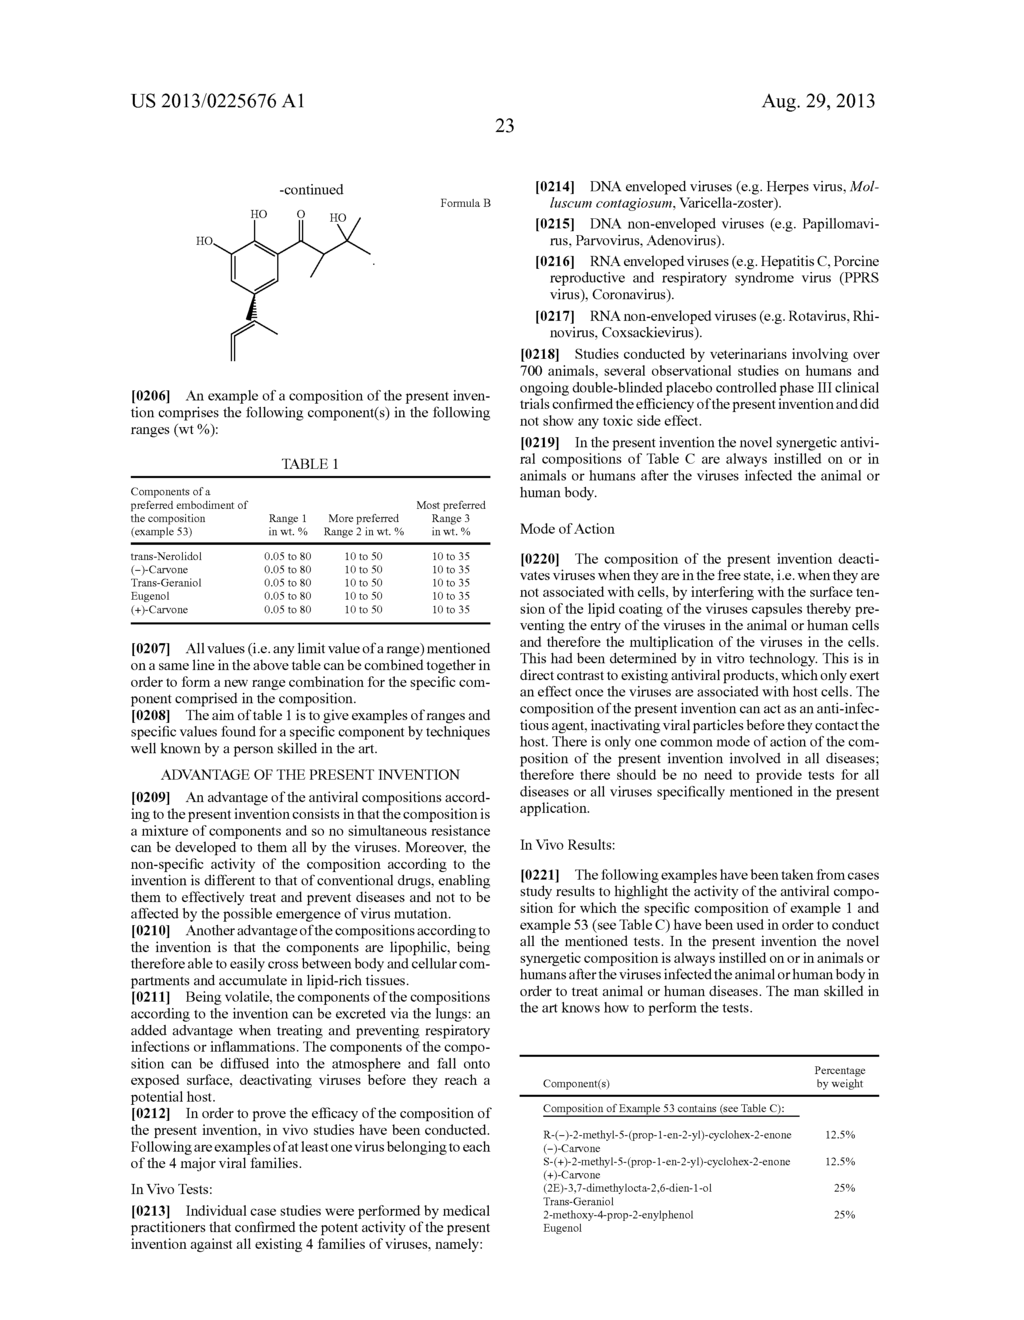 VIRAL INHIBITOR COMPOSITIONS FOR IN VIVO THERAPEUTIC USE COMPRISING A     COMBINATION OF (-) -CARVONE, GERANIOL AND A FURTHER ESSENTIAL OIL     COMPONENT - diagram, schematic, and image 24